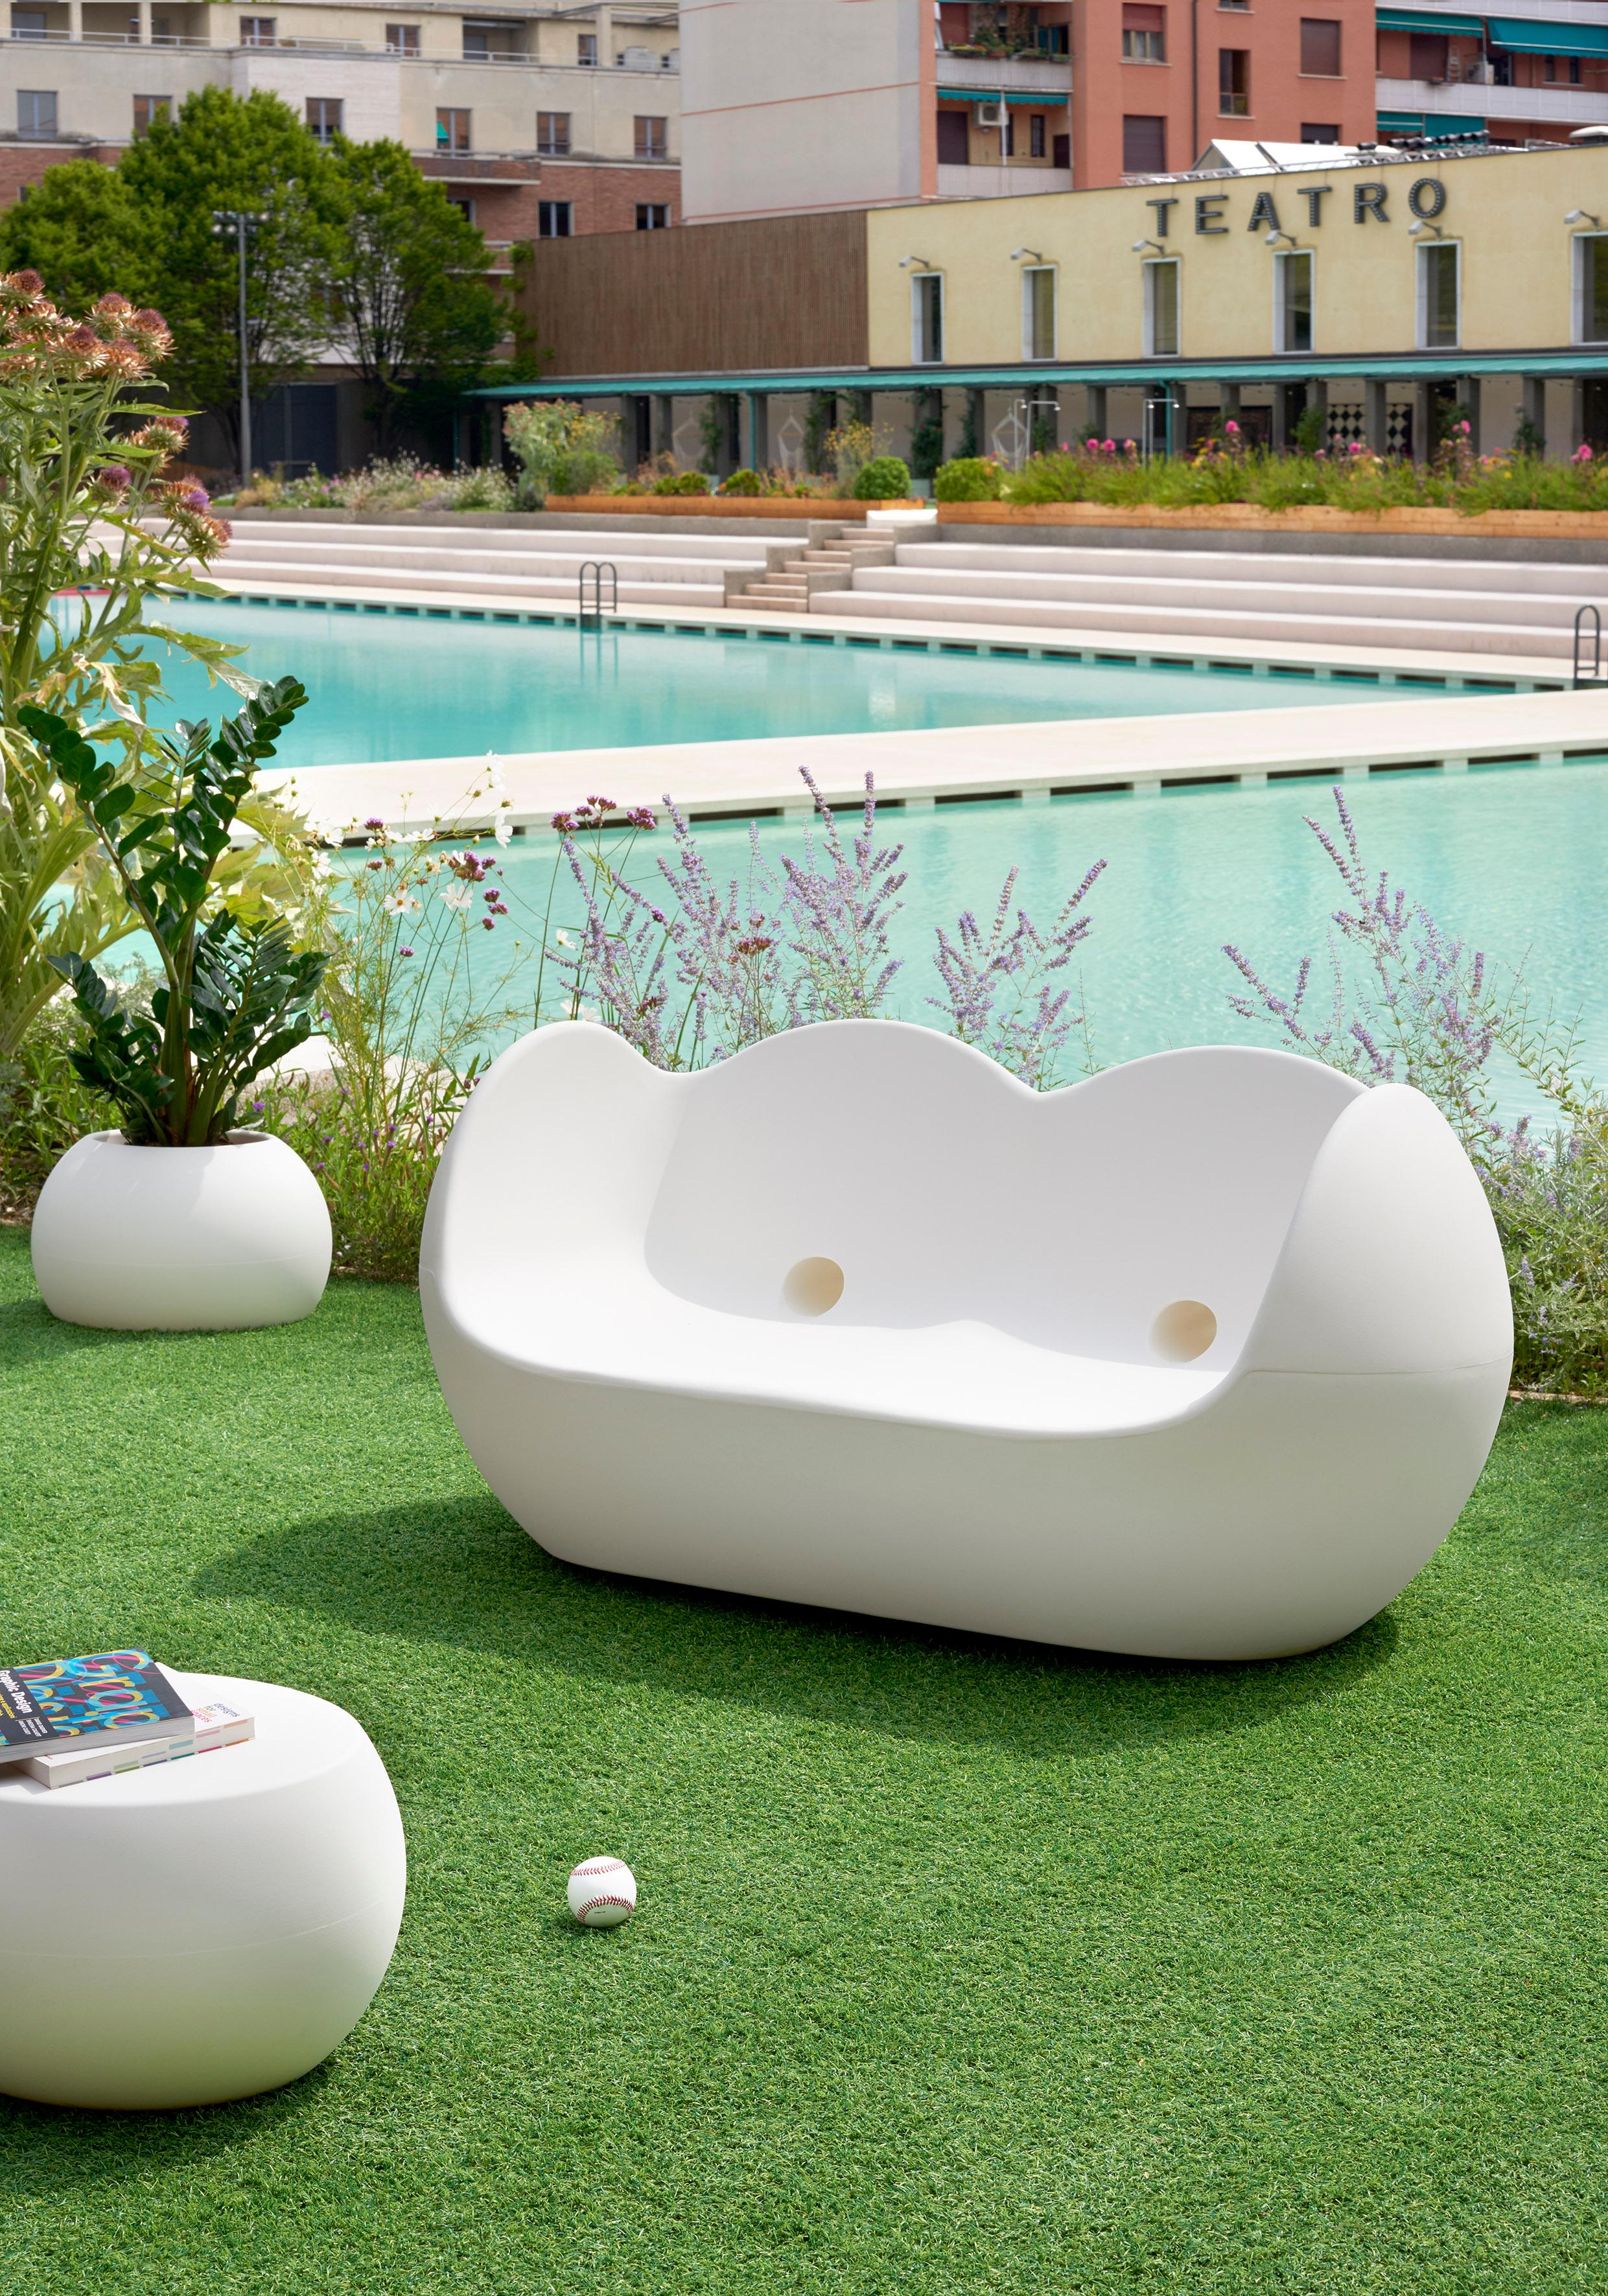 Milky White Blossy Rocking Sofa by Karim Rashid
Dimensions: D 85 x W 159 x H 75 cm. Seat Height: 34 cm.
Materials: Polyethylene.
Weight: 38 kg.

Available in different color options. This product is suitable for indoor and outdoor use. Please